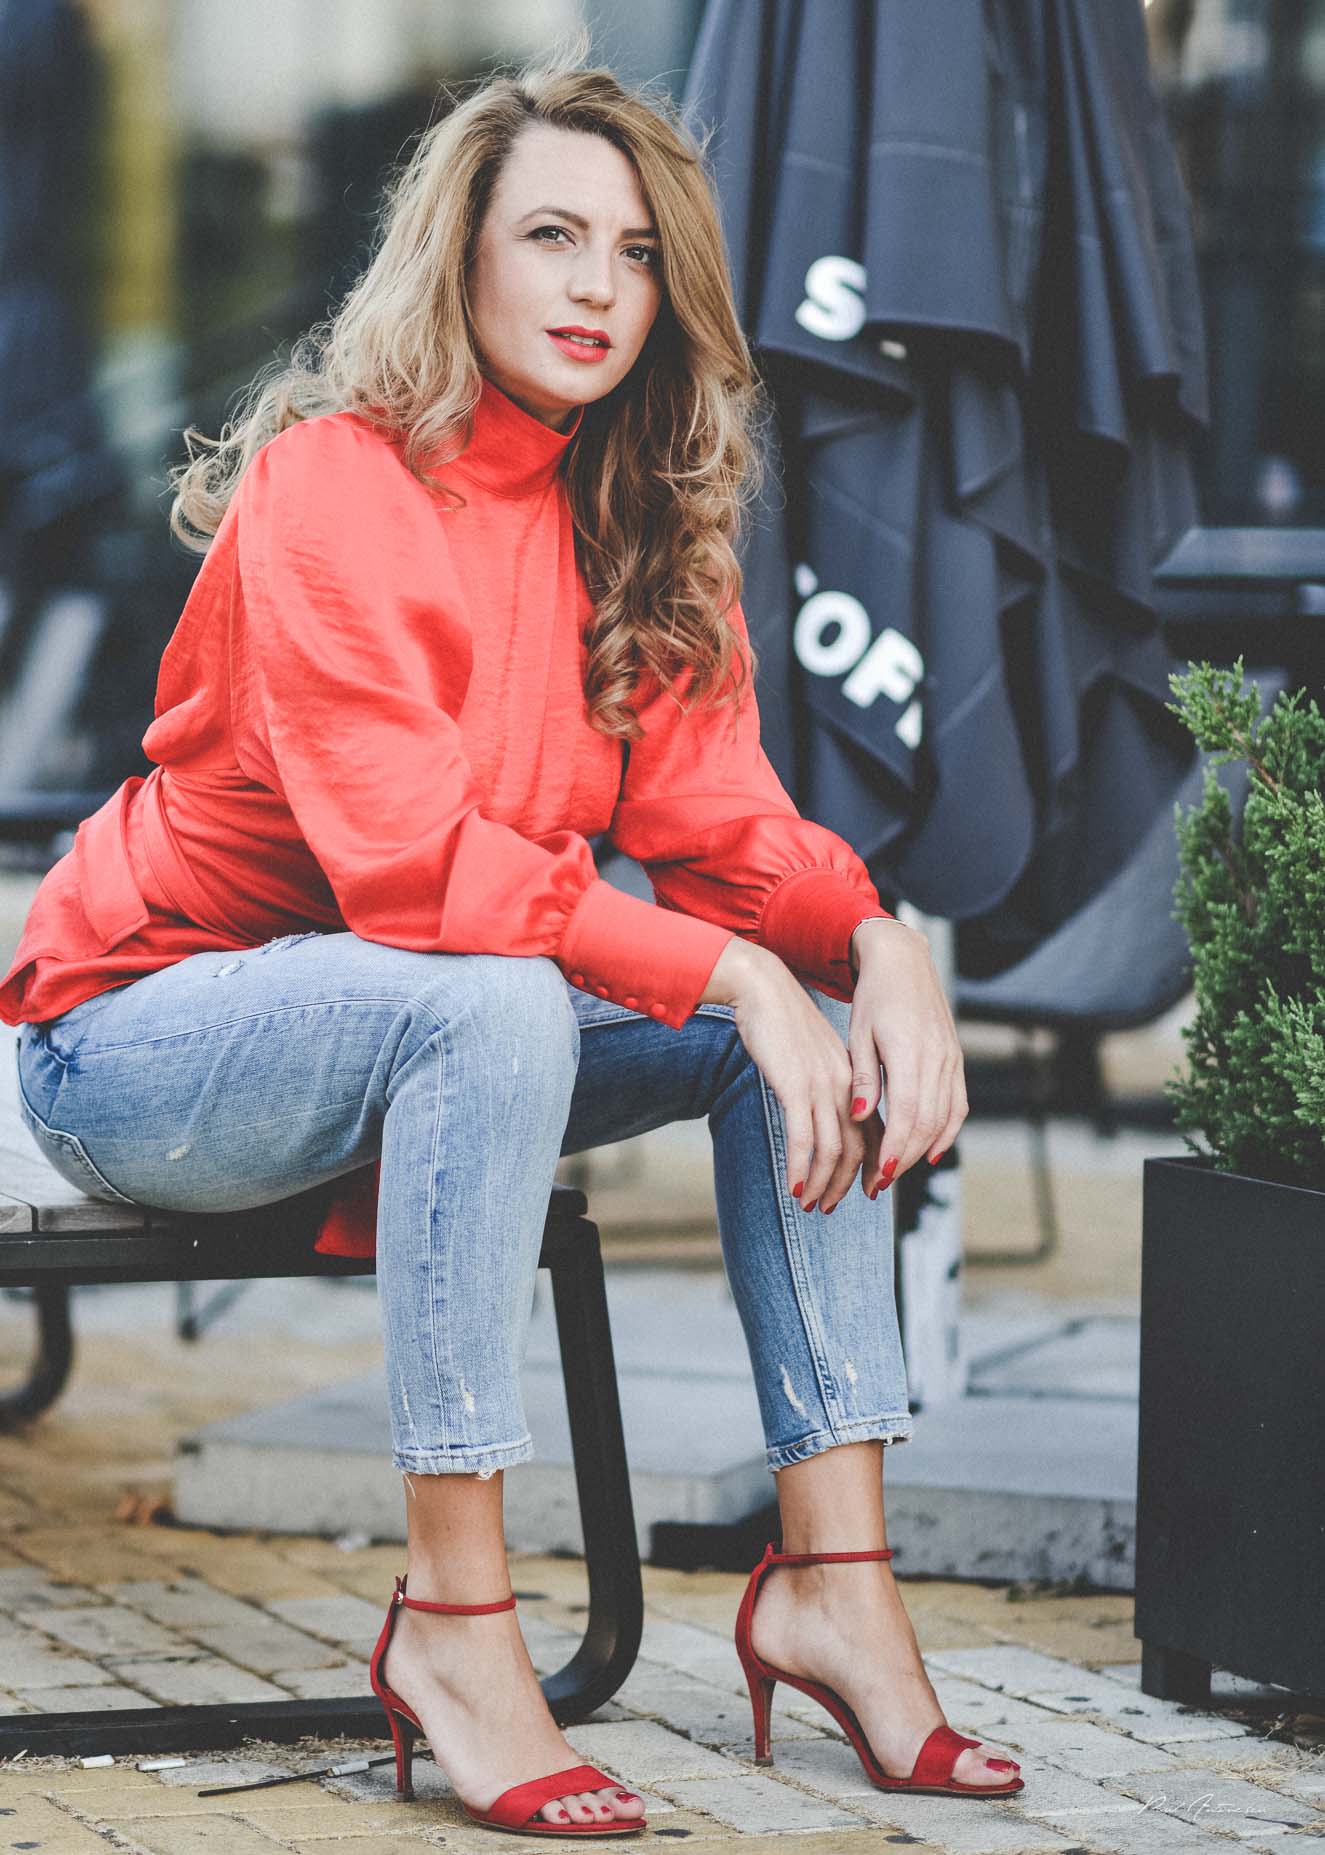 A pretty blonde girl wearing blue jeans, red fancy shoes and a red top posing for the camera in the city.